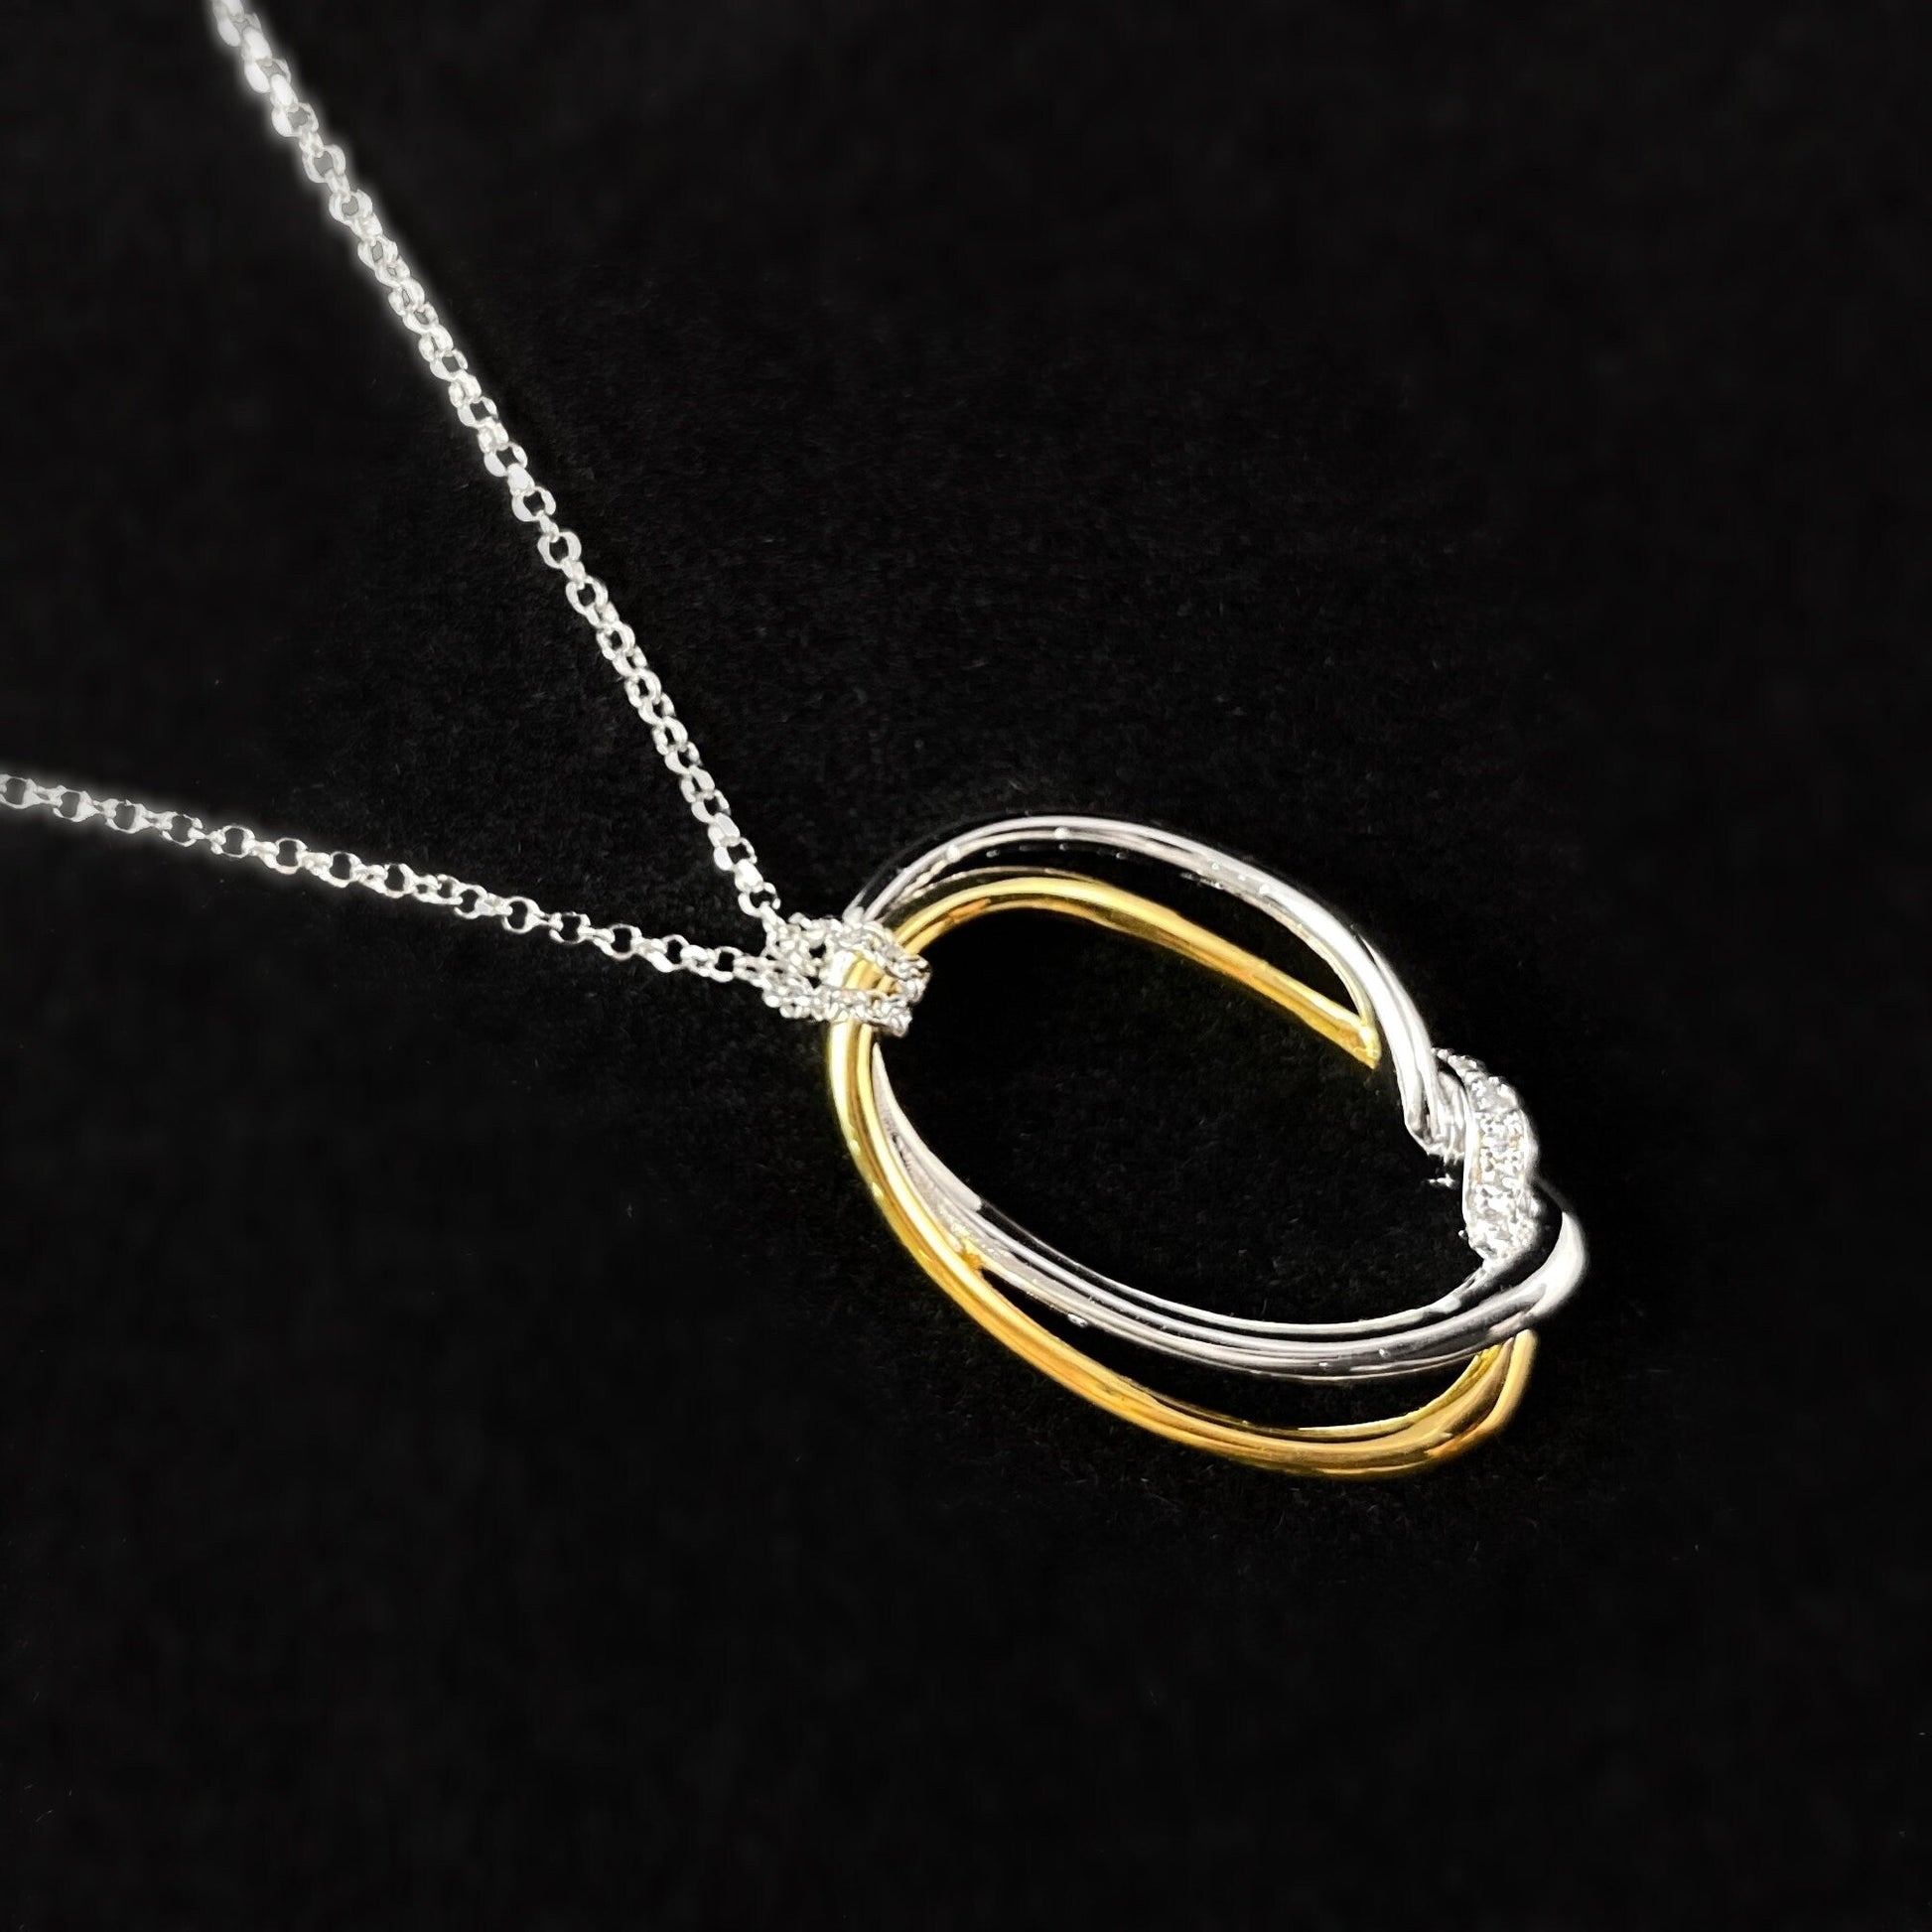 925 Sterling Silver and 18kt Yellow Gold Swirl Necklace - Elle Jewelry